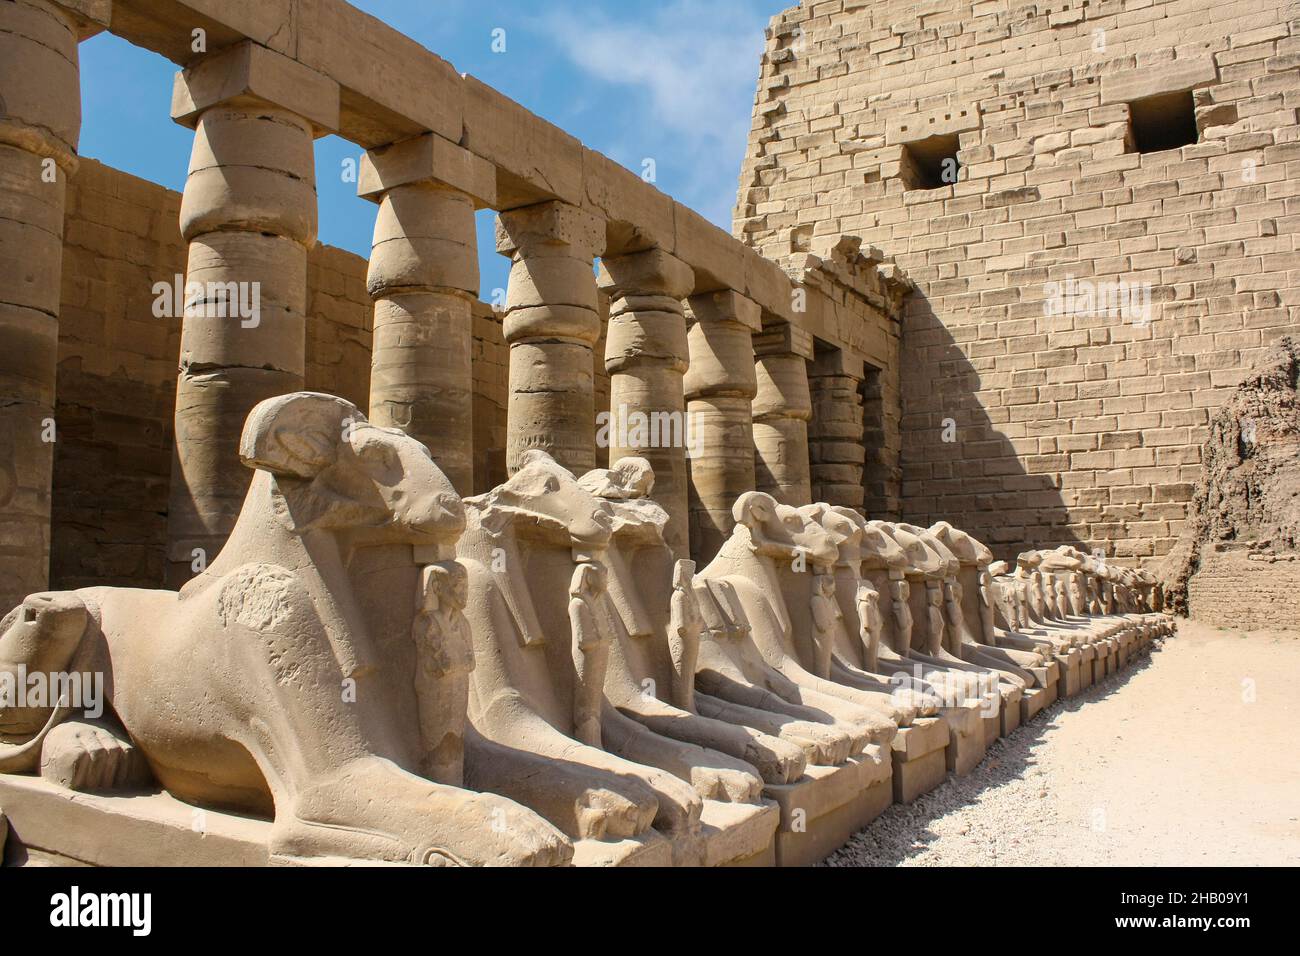 Karnak temple complex in Luxor, Egypt. Criosphinxes alley, guard sphinxes with the ram heads. Stock Photo